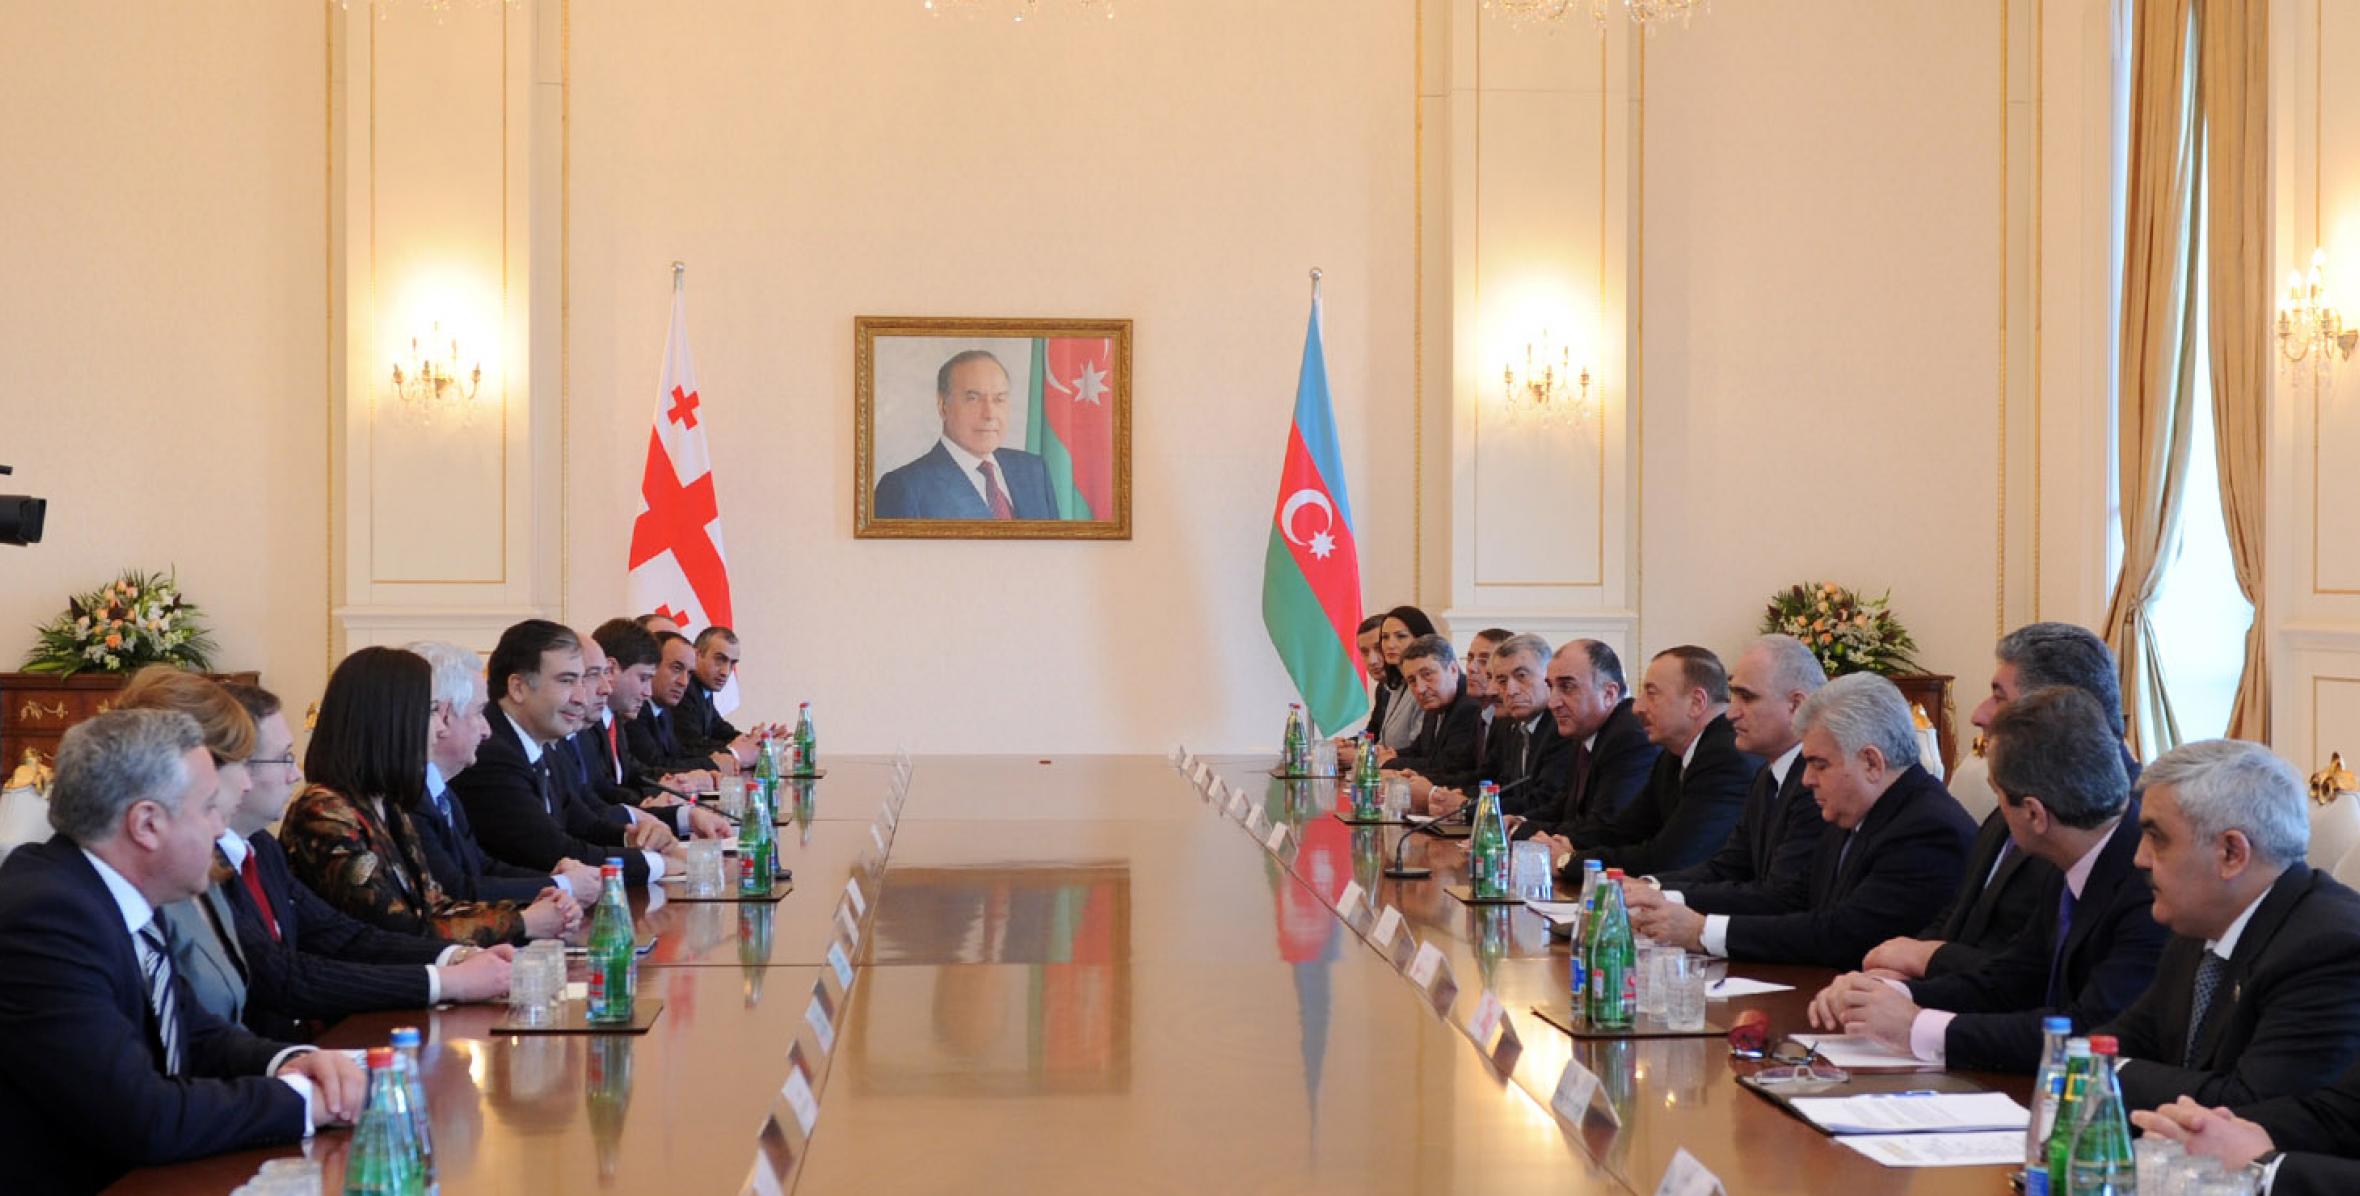 President of Azerbaijan Ilham Aliyev and President of Georgia Mikheil Saakashvili had a meeting in an expanded format